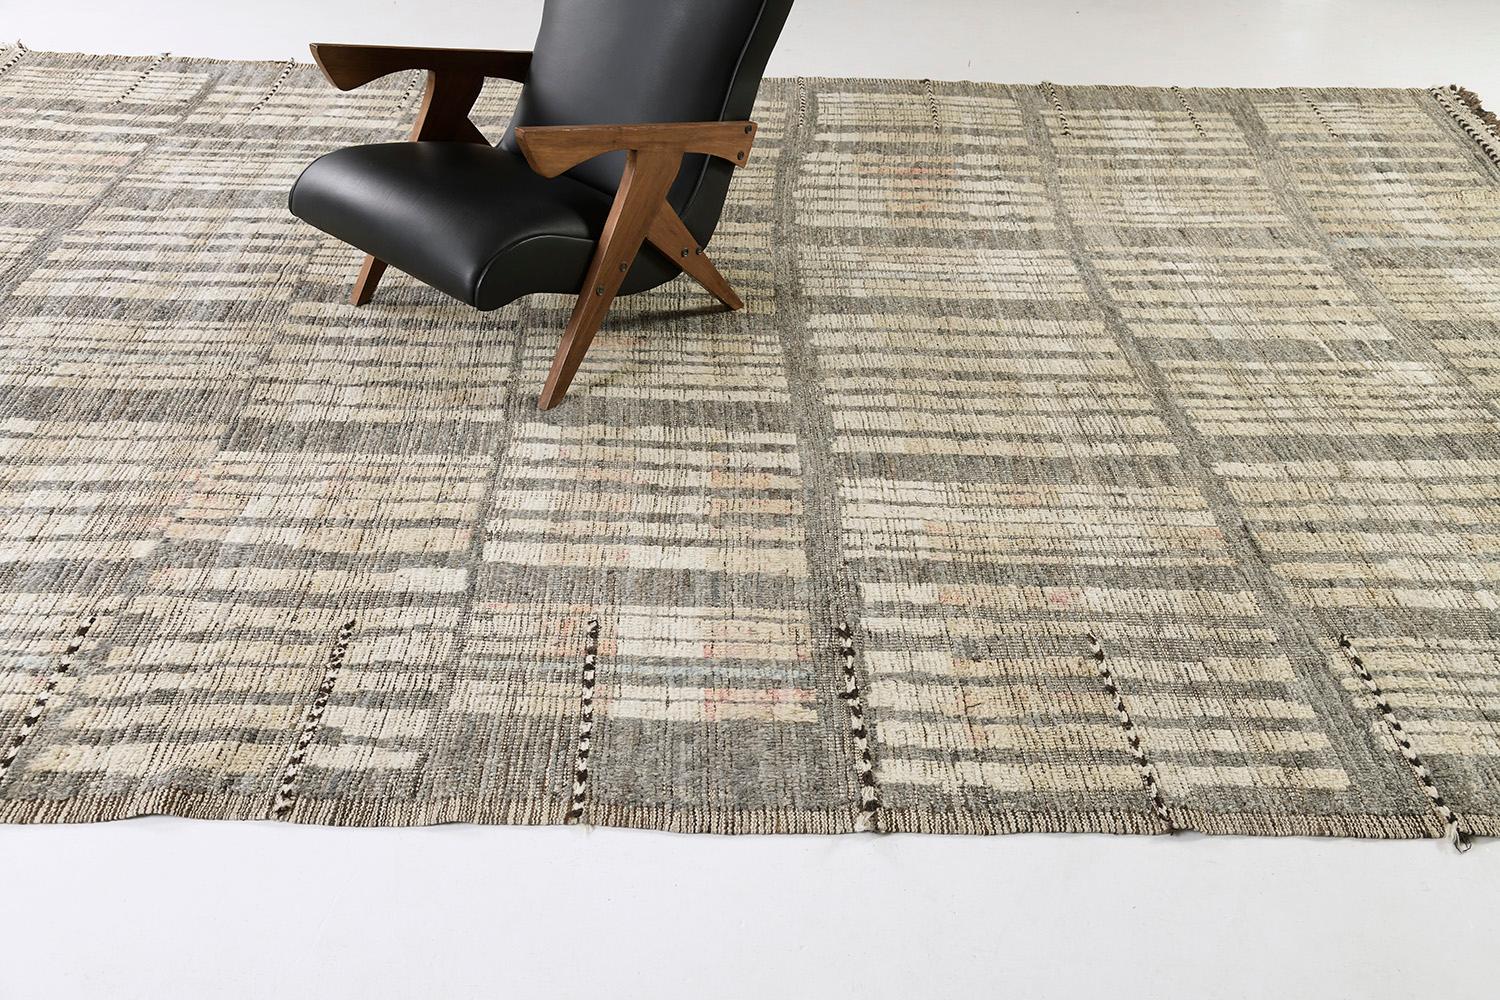 Bacatta uses linework and color to create definition and movement into handwoven wool. Line detailing in gray, gold, and brown tones fascinatingly moves across the rug. Detailed natural pile weave runs around the border with tassels adding an